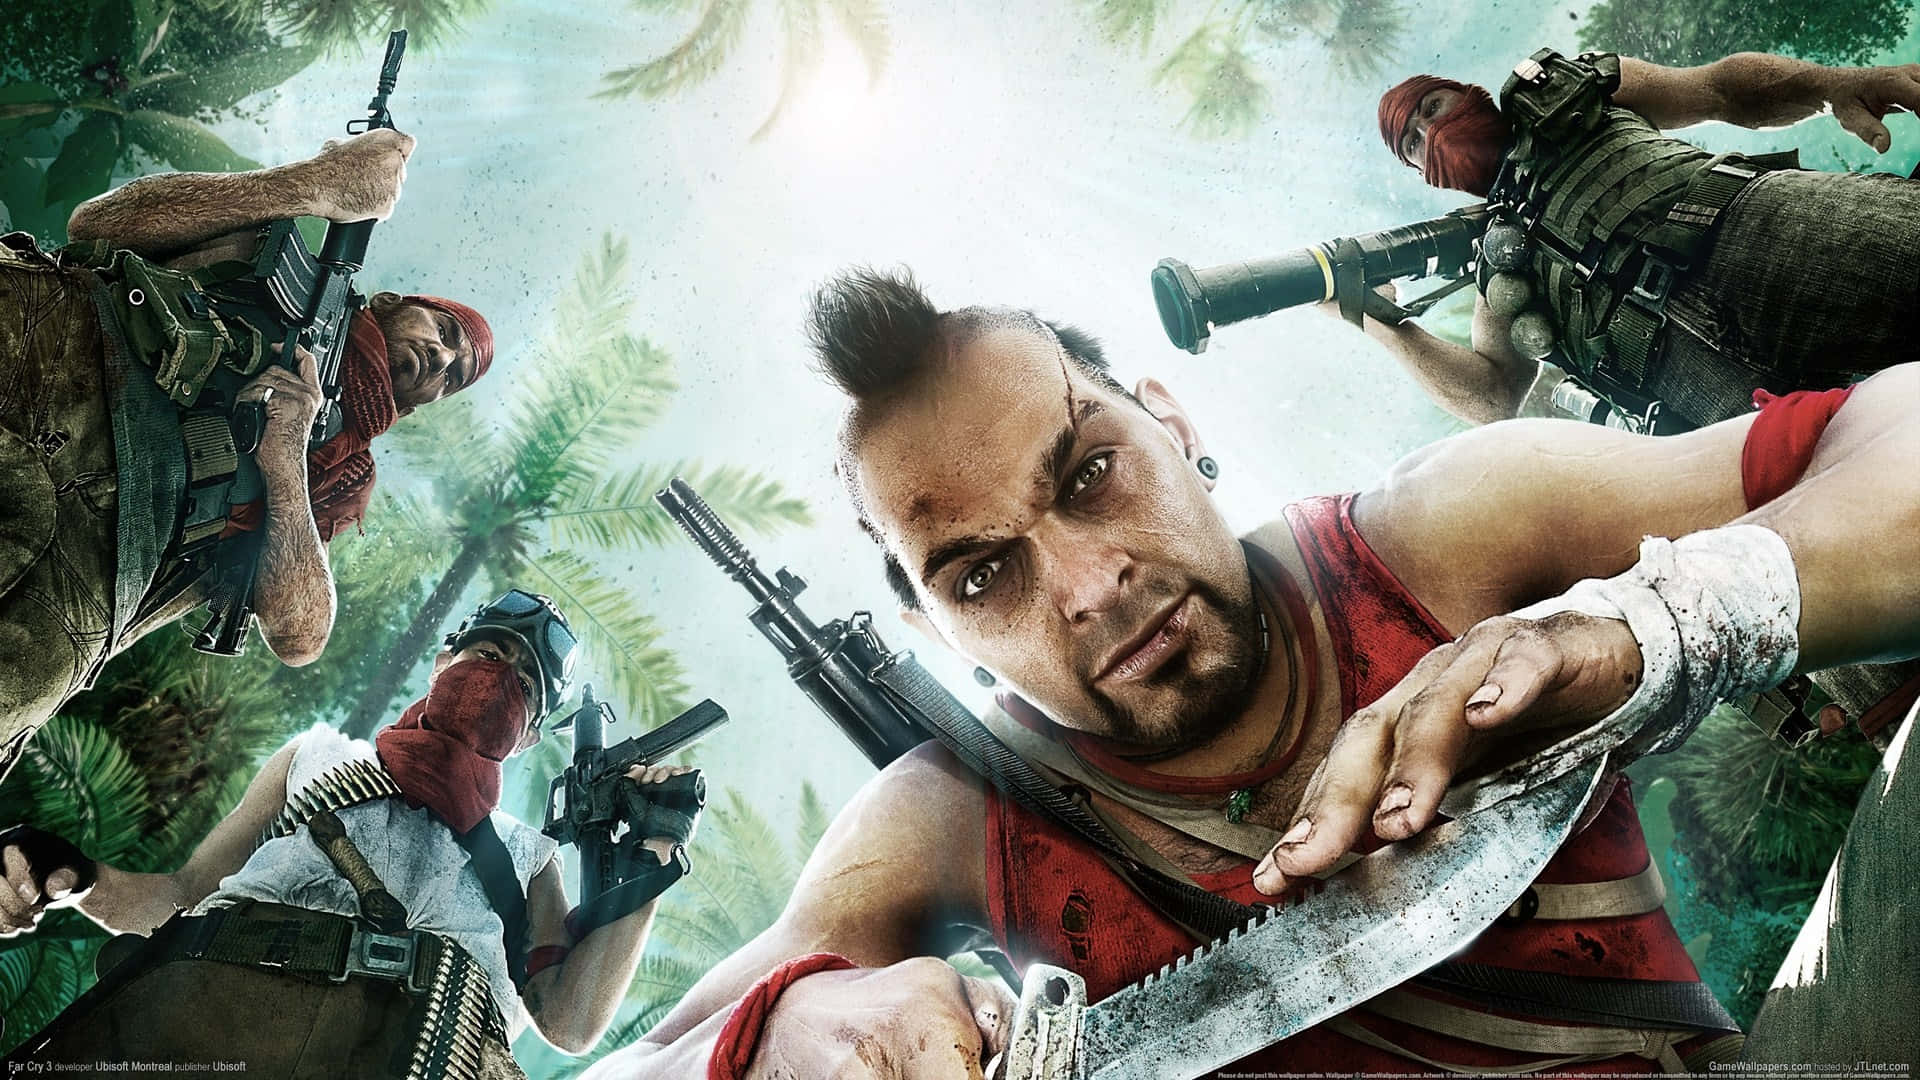 Feel the freedom of roaming the islands of Far Cry 3